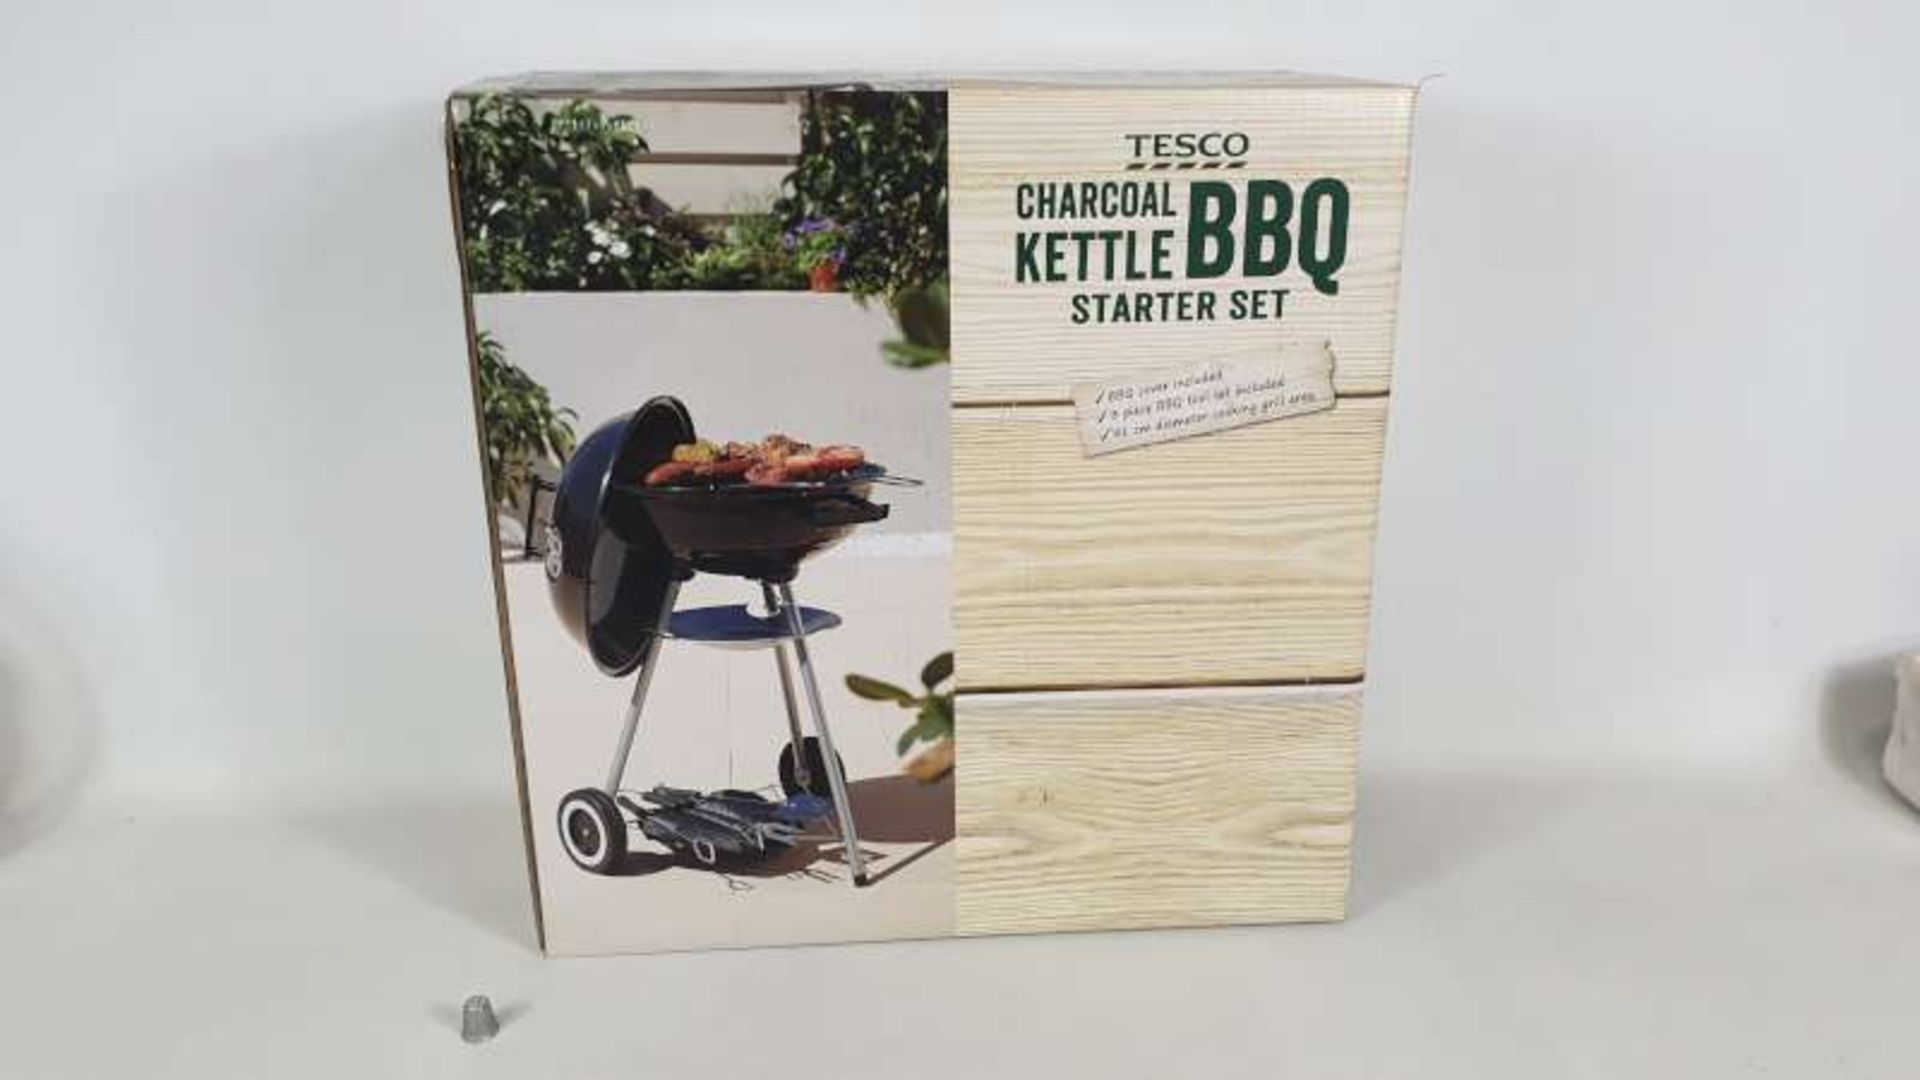 5 X BRAND NEW BOXED CHARCOAL KETTLE BBQ STARTER SETS